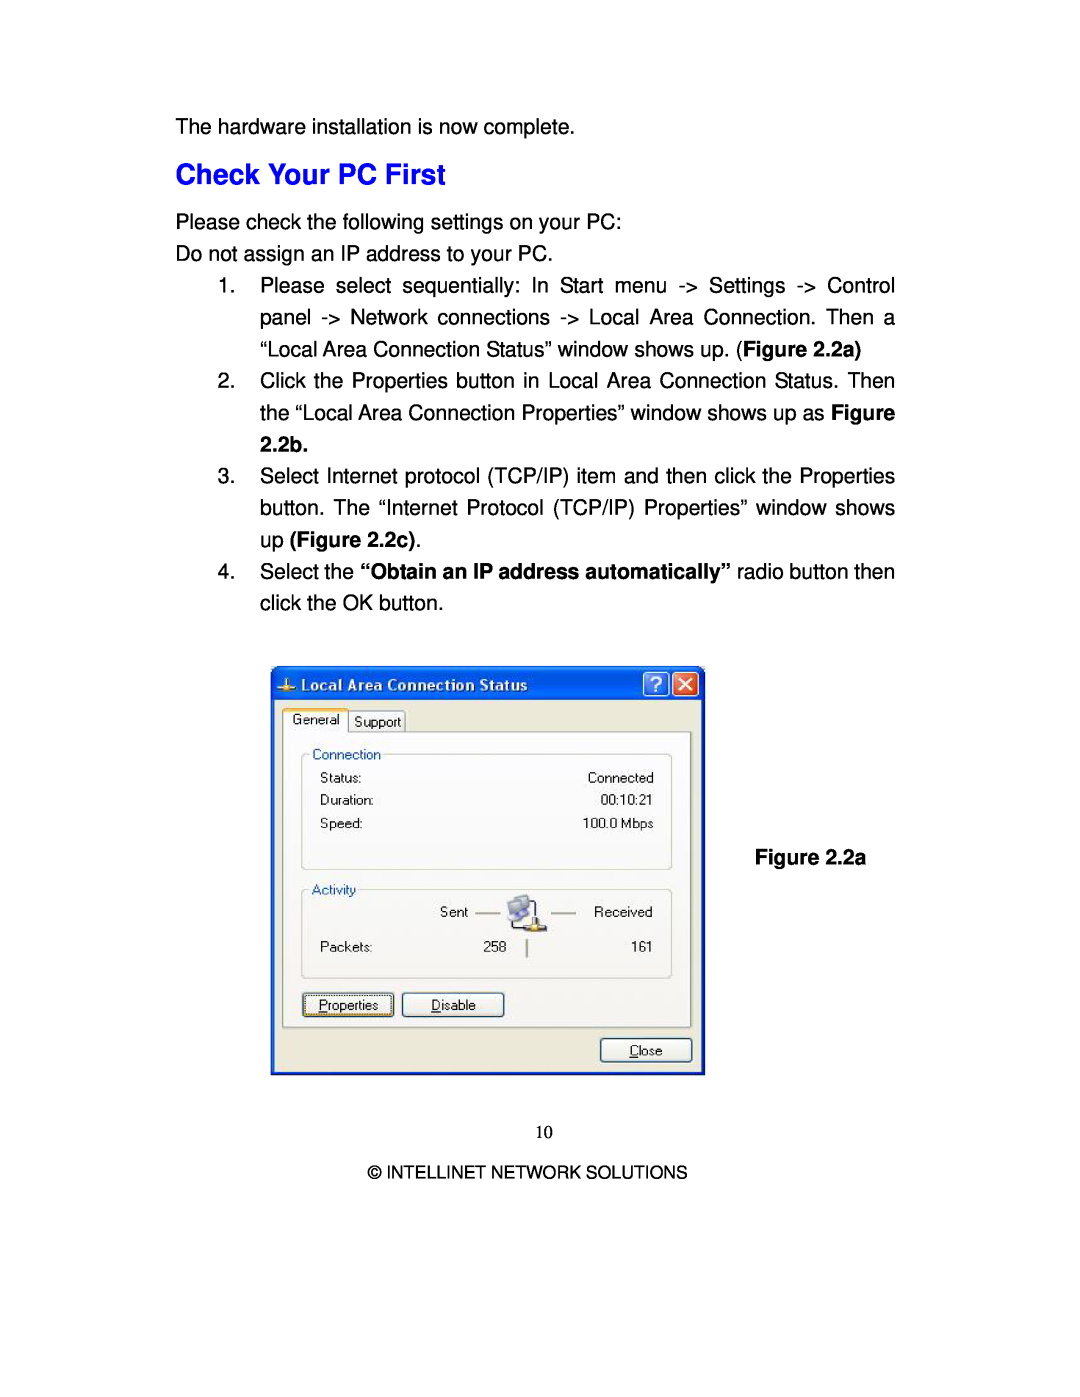 Intellinet Network Solutions 501705 manual Check Your PC First, 2a 